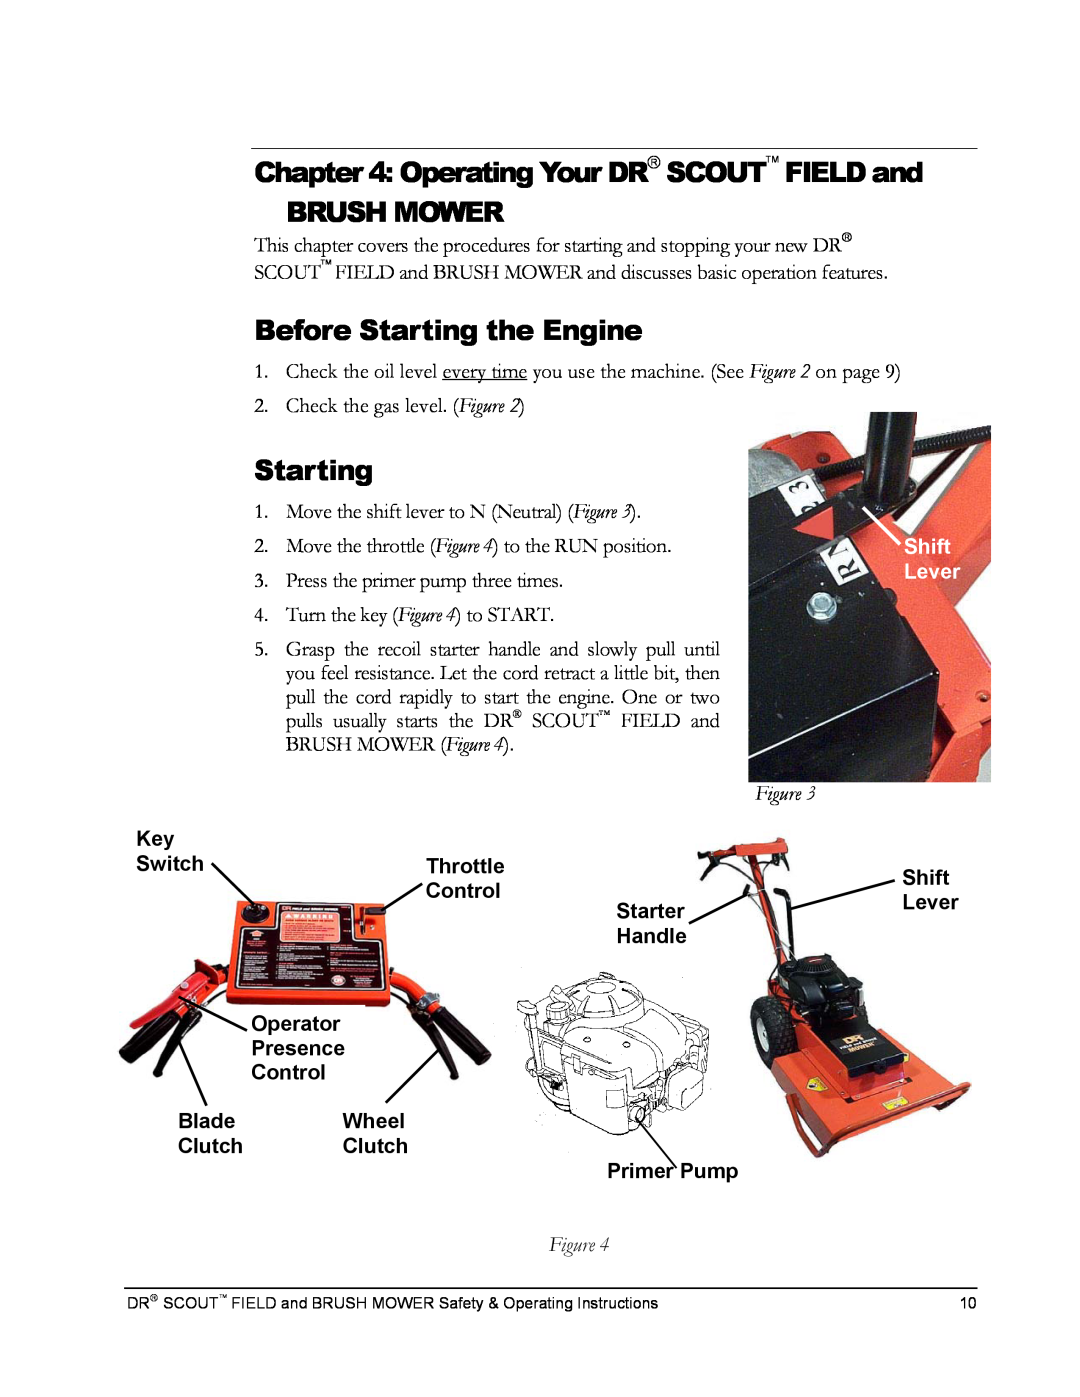 Country Home Products DR SCOUT FIELD and BRUSH MOWER manual Operating Your DR SCOUT FIELD and BRUSH MOWER, Starting 